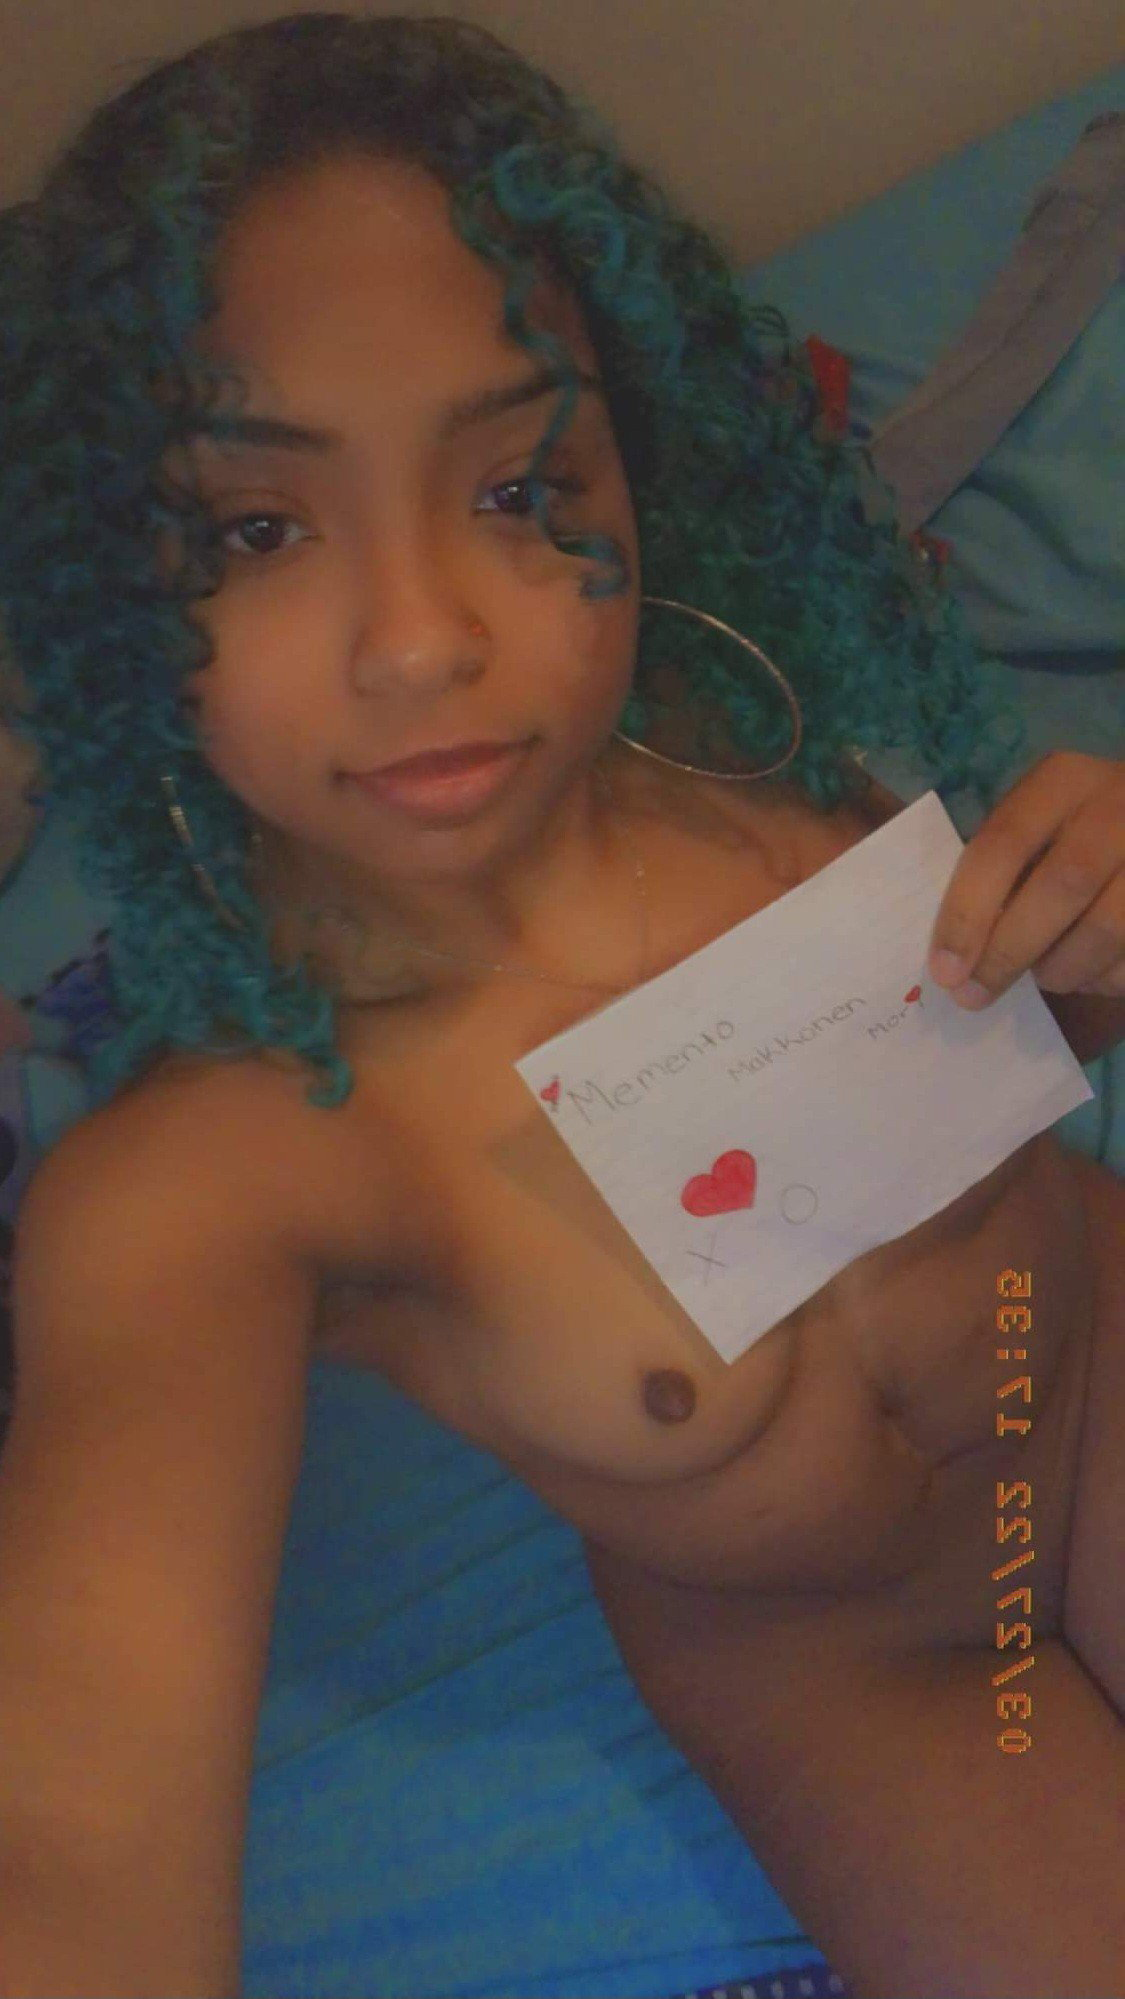 Watch the Photo by UnTouchaBallzX0 with the username @UnTouchaBallzX0, who is a verified user, posted on December 4, 2023. The post is about the topic My Beautiful Fans! X❤️O. and the text says '- One of my beautiful fans showing me some love. X❤️O #MyFans #Fansigns #MementoMakkonenMori #Slut #Hoe #Whore #TongueOut'